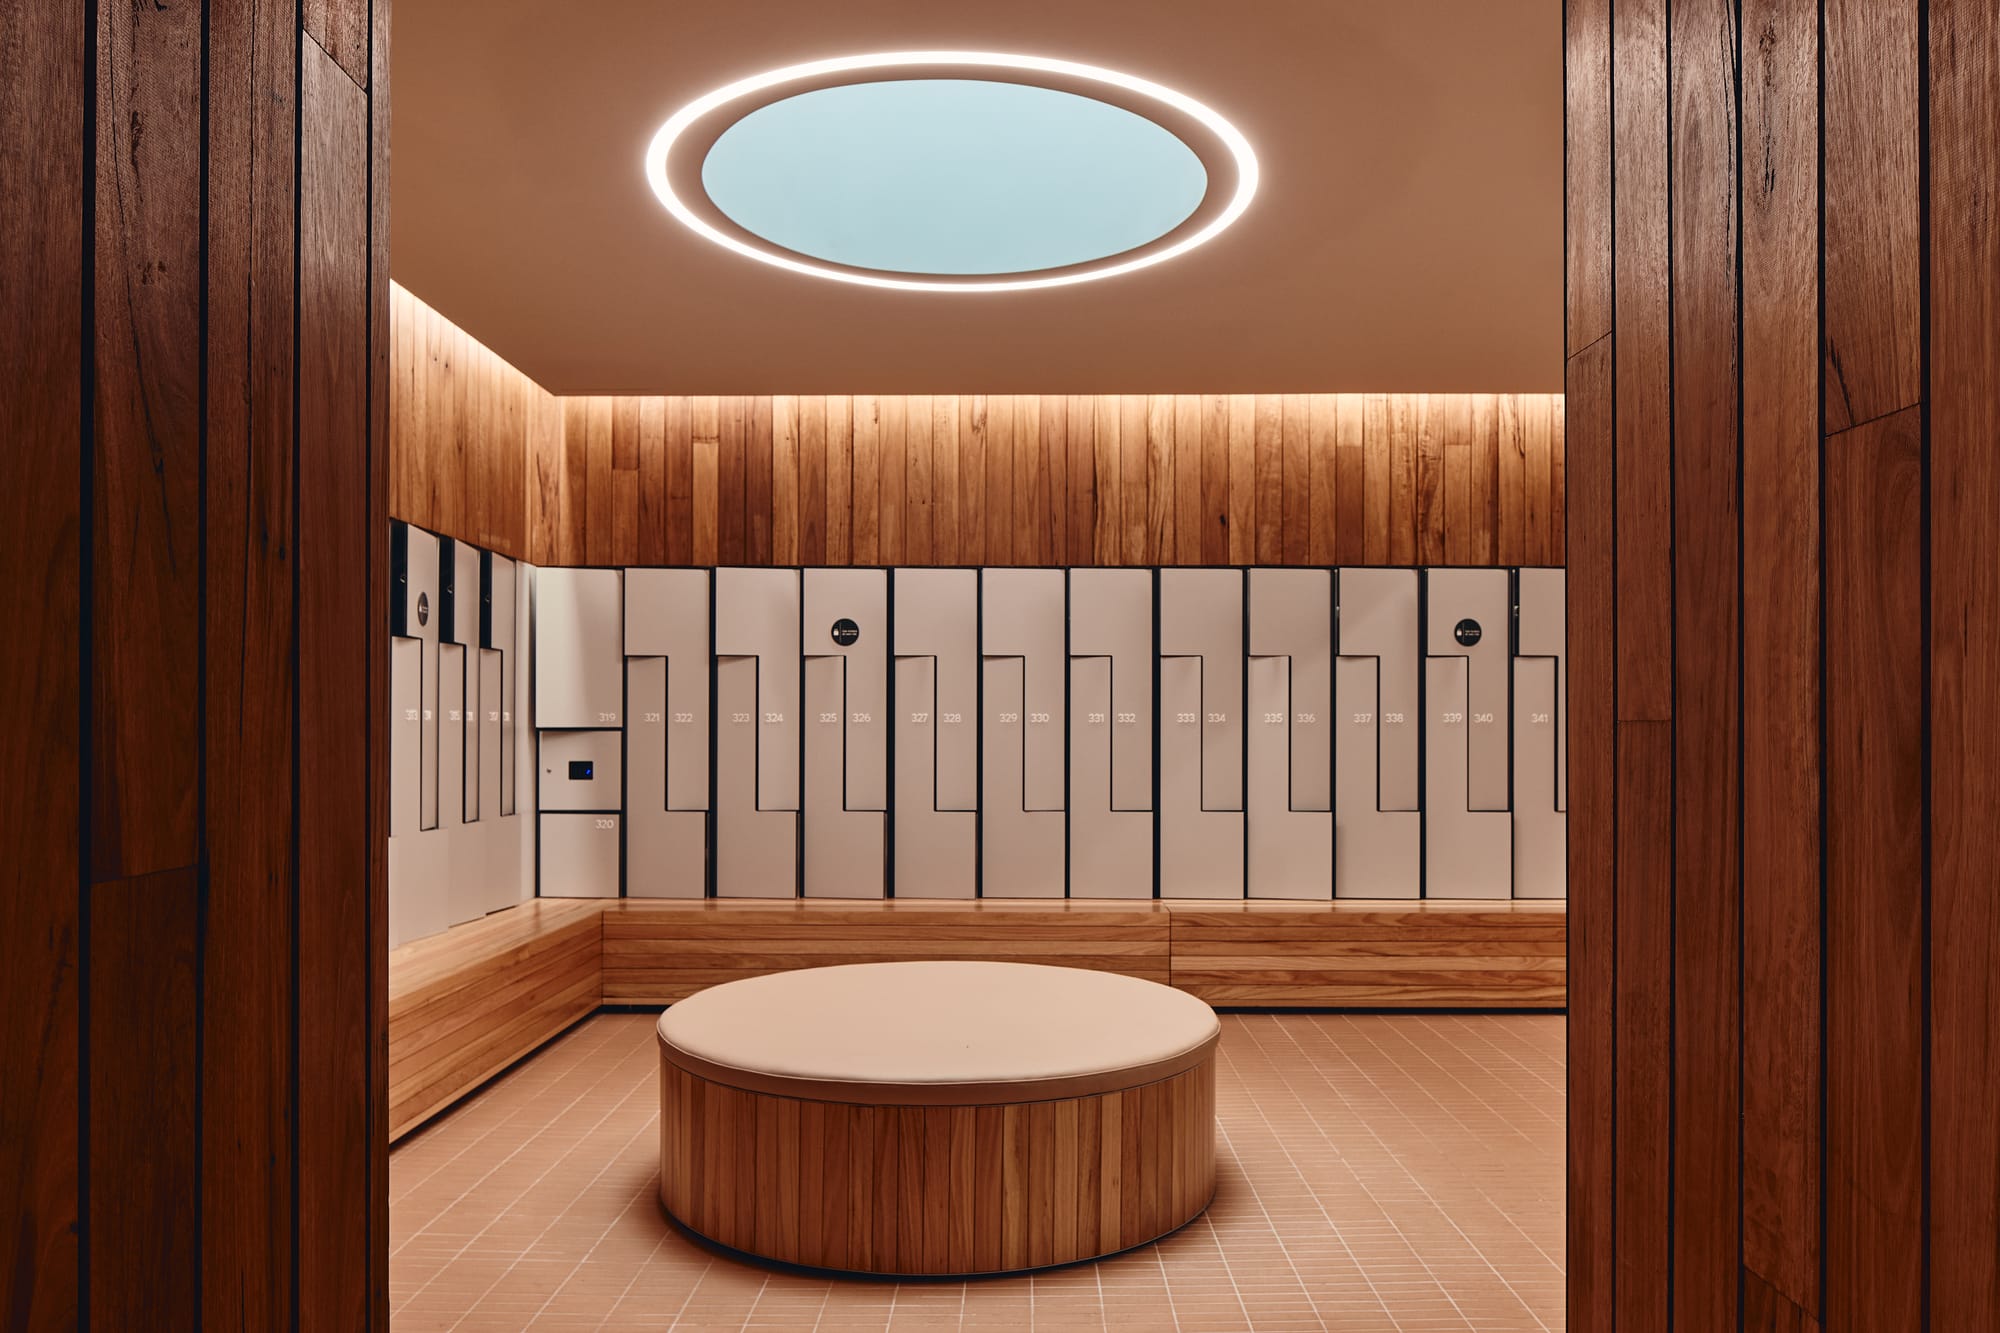 Parramatta Aquatic Centre by Mortlock Timbers. Photography by Peter Bennetts. Indoor locker room with round timber seat in centre of room. Timber clad walls, tile floors and white lockers. 